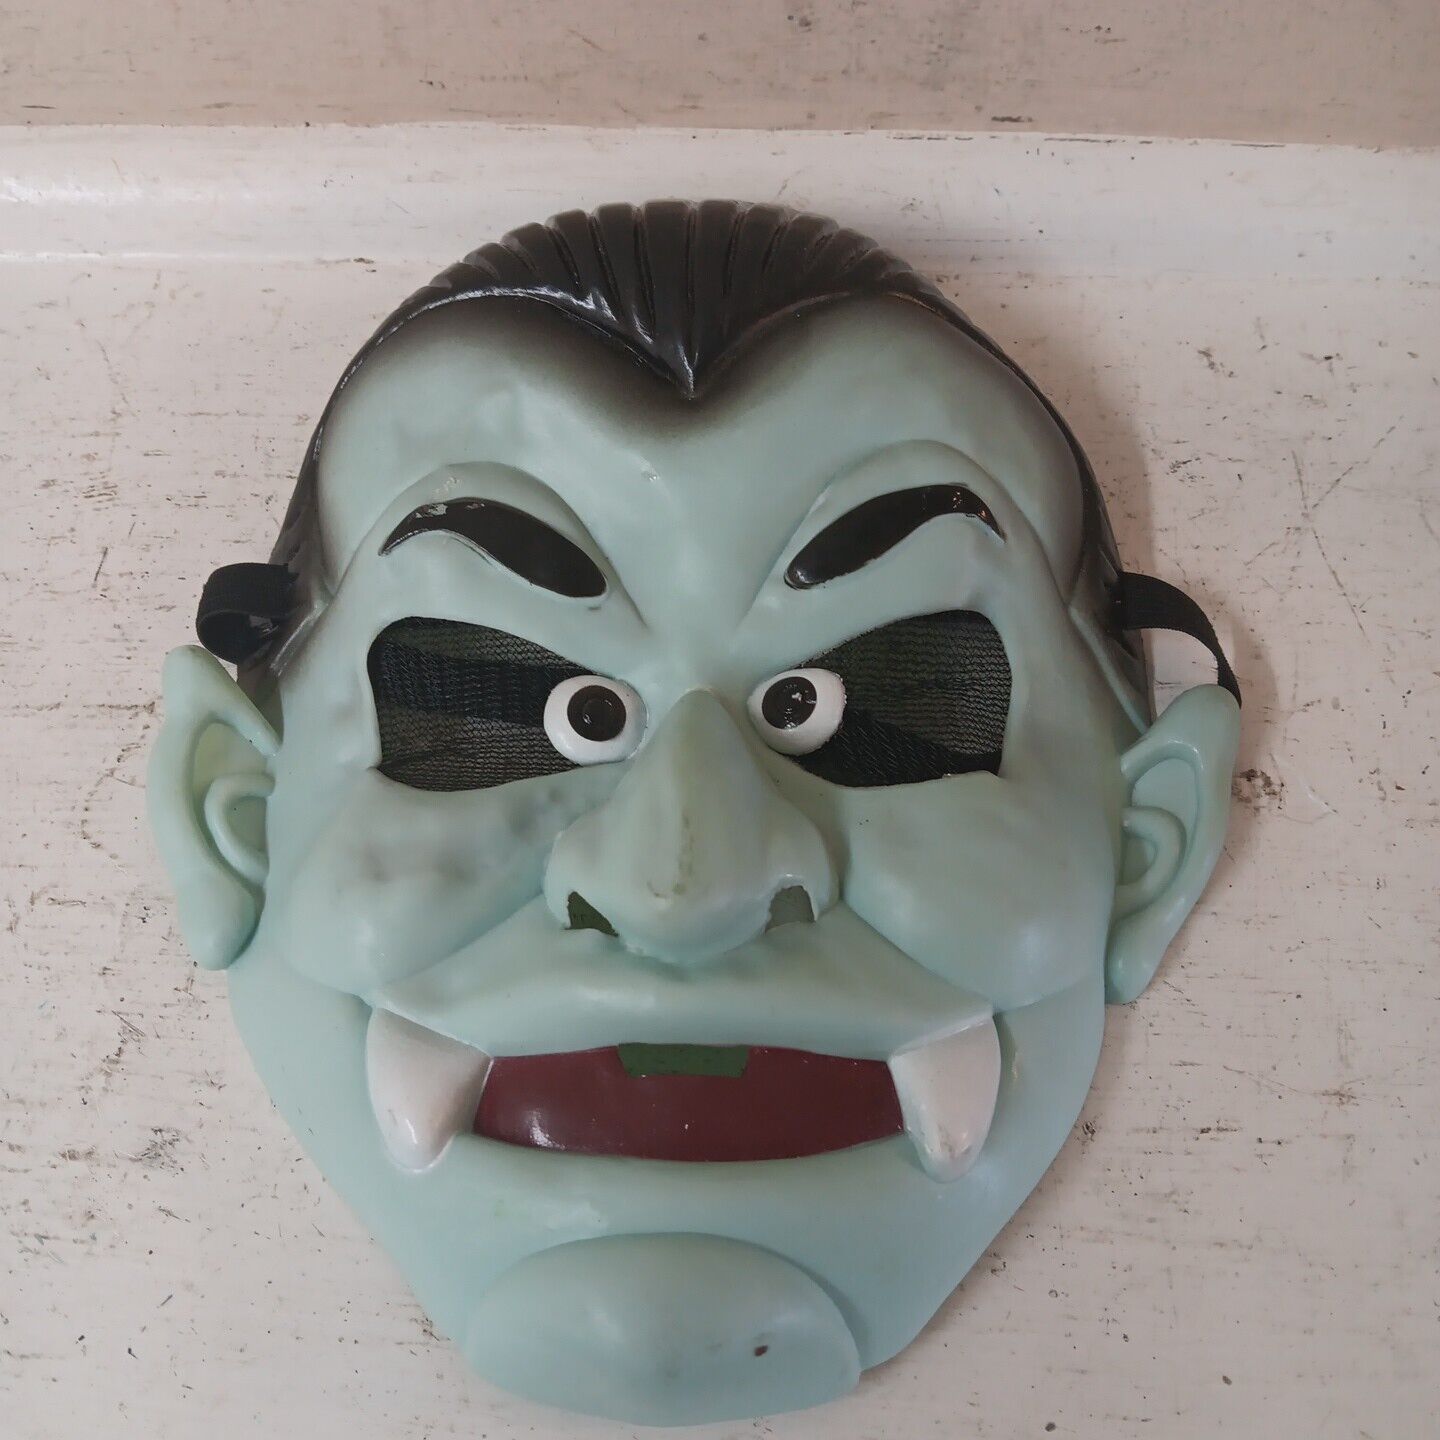 Vintage Rubber Count Dracula Vampire Childs Halloween Mask Preowned Condition 